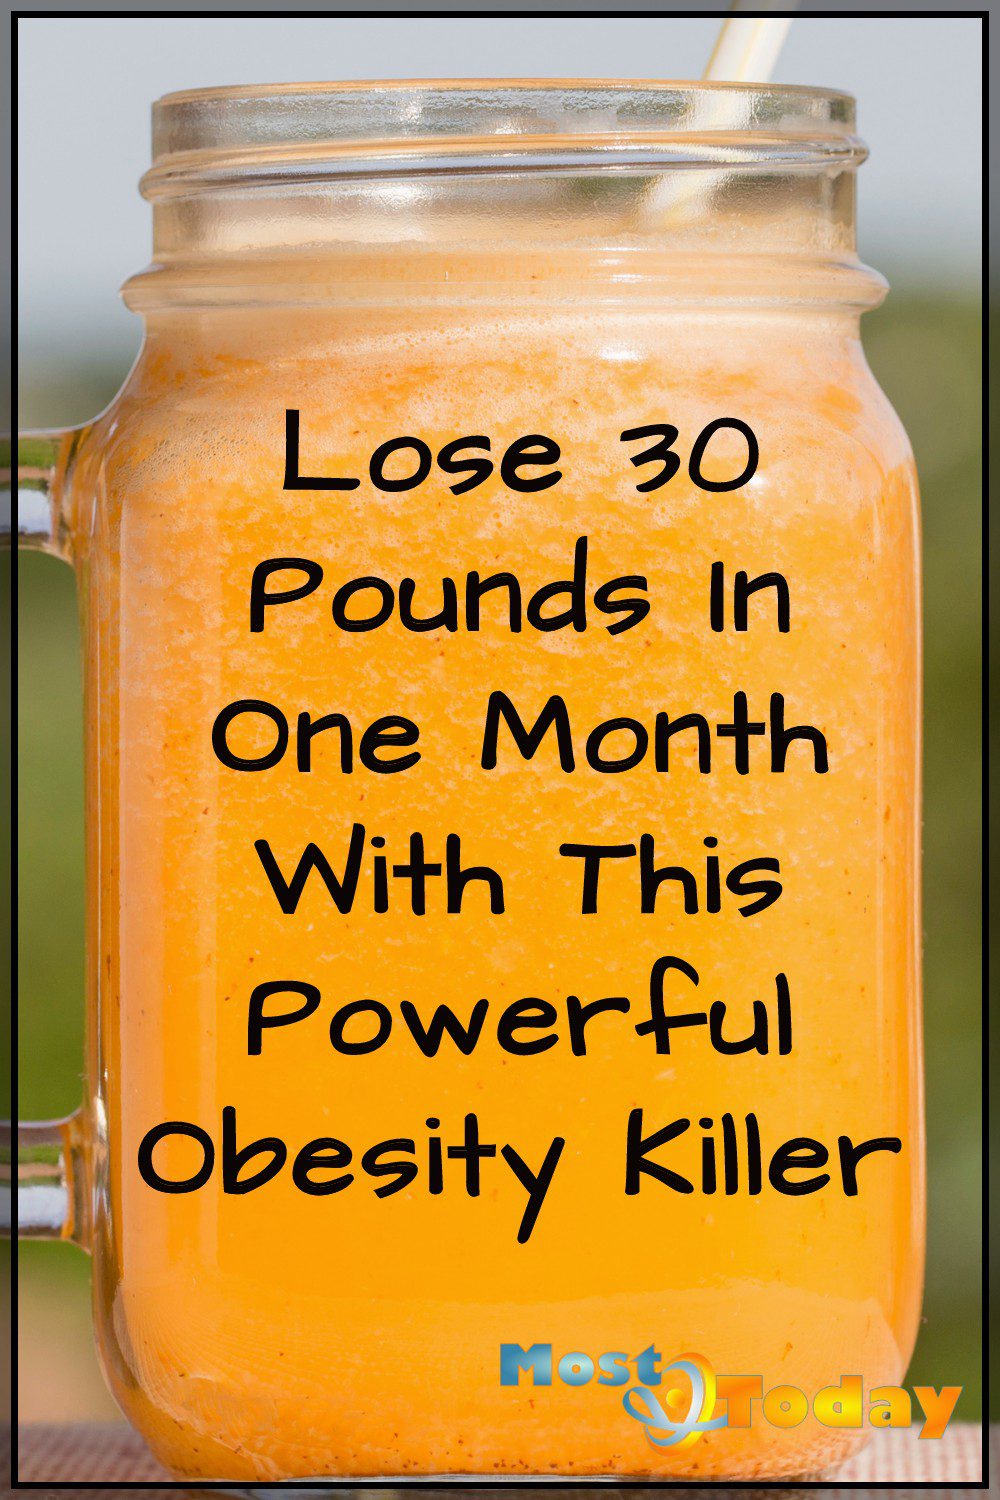 Lose 30 Pounds In 1 Month With This Powerful Obesity Killer!